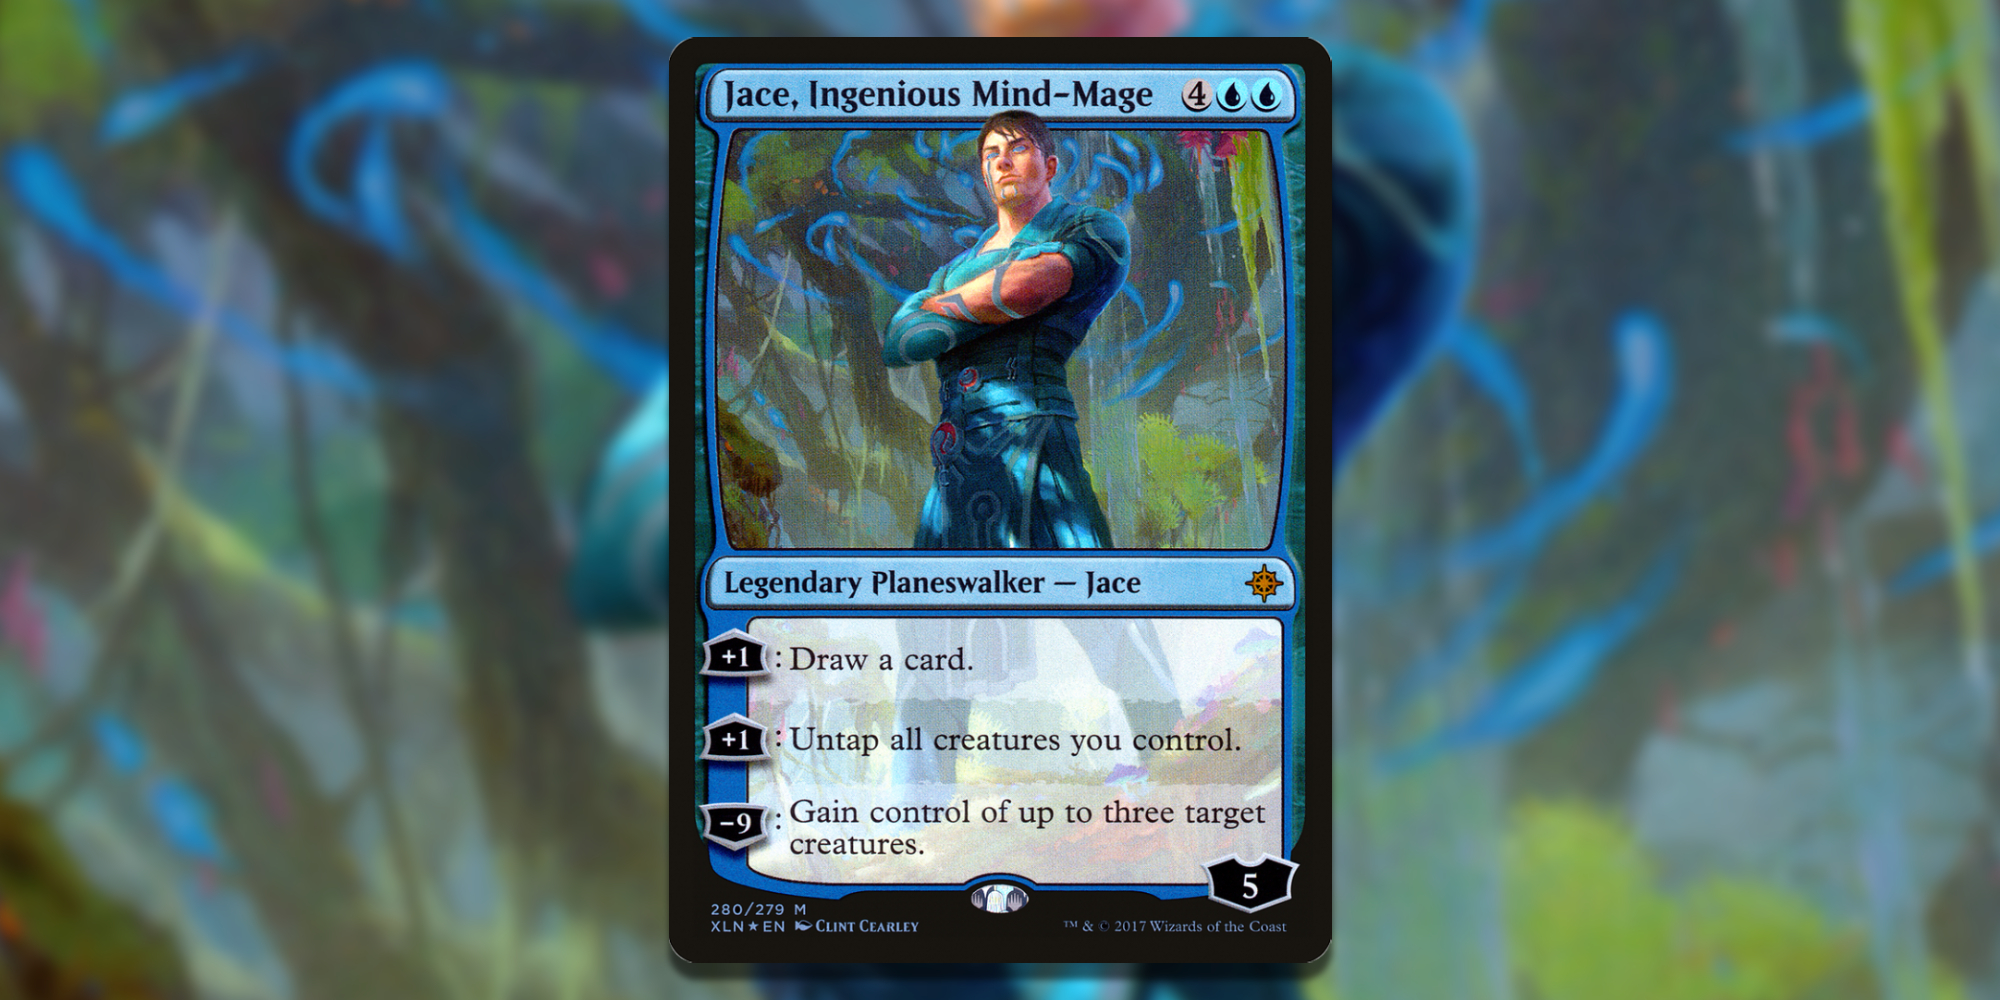 Card of Jace Ingenious Mind-Mage over Art Background